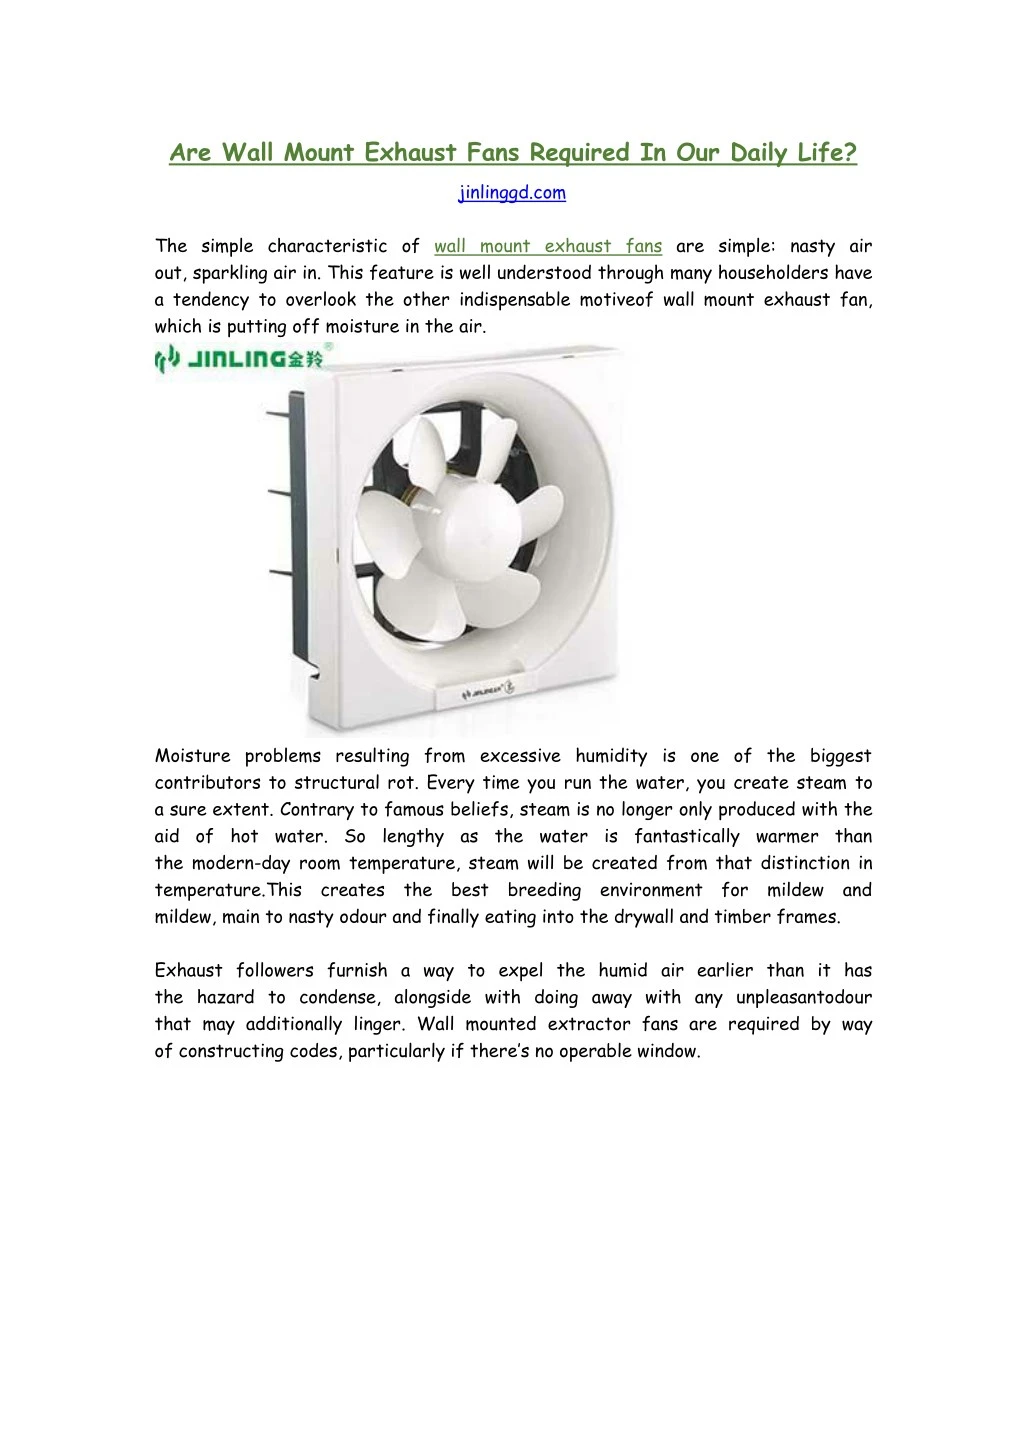 are wall mount exhaust fans required in our daily